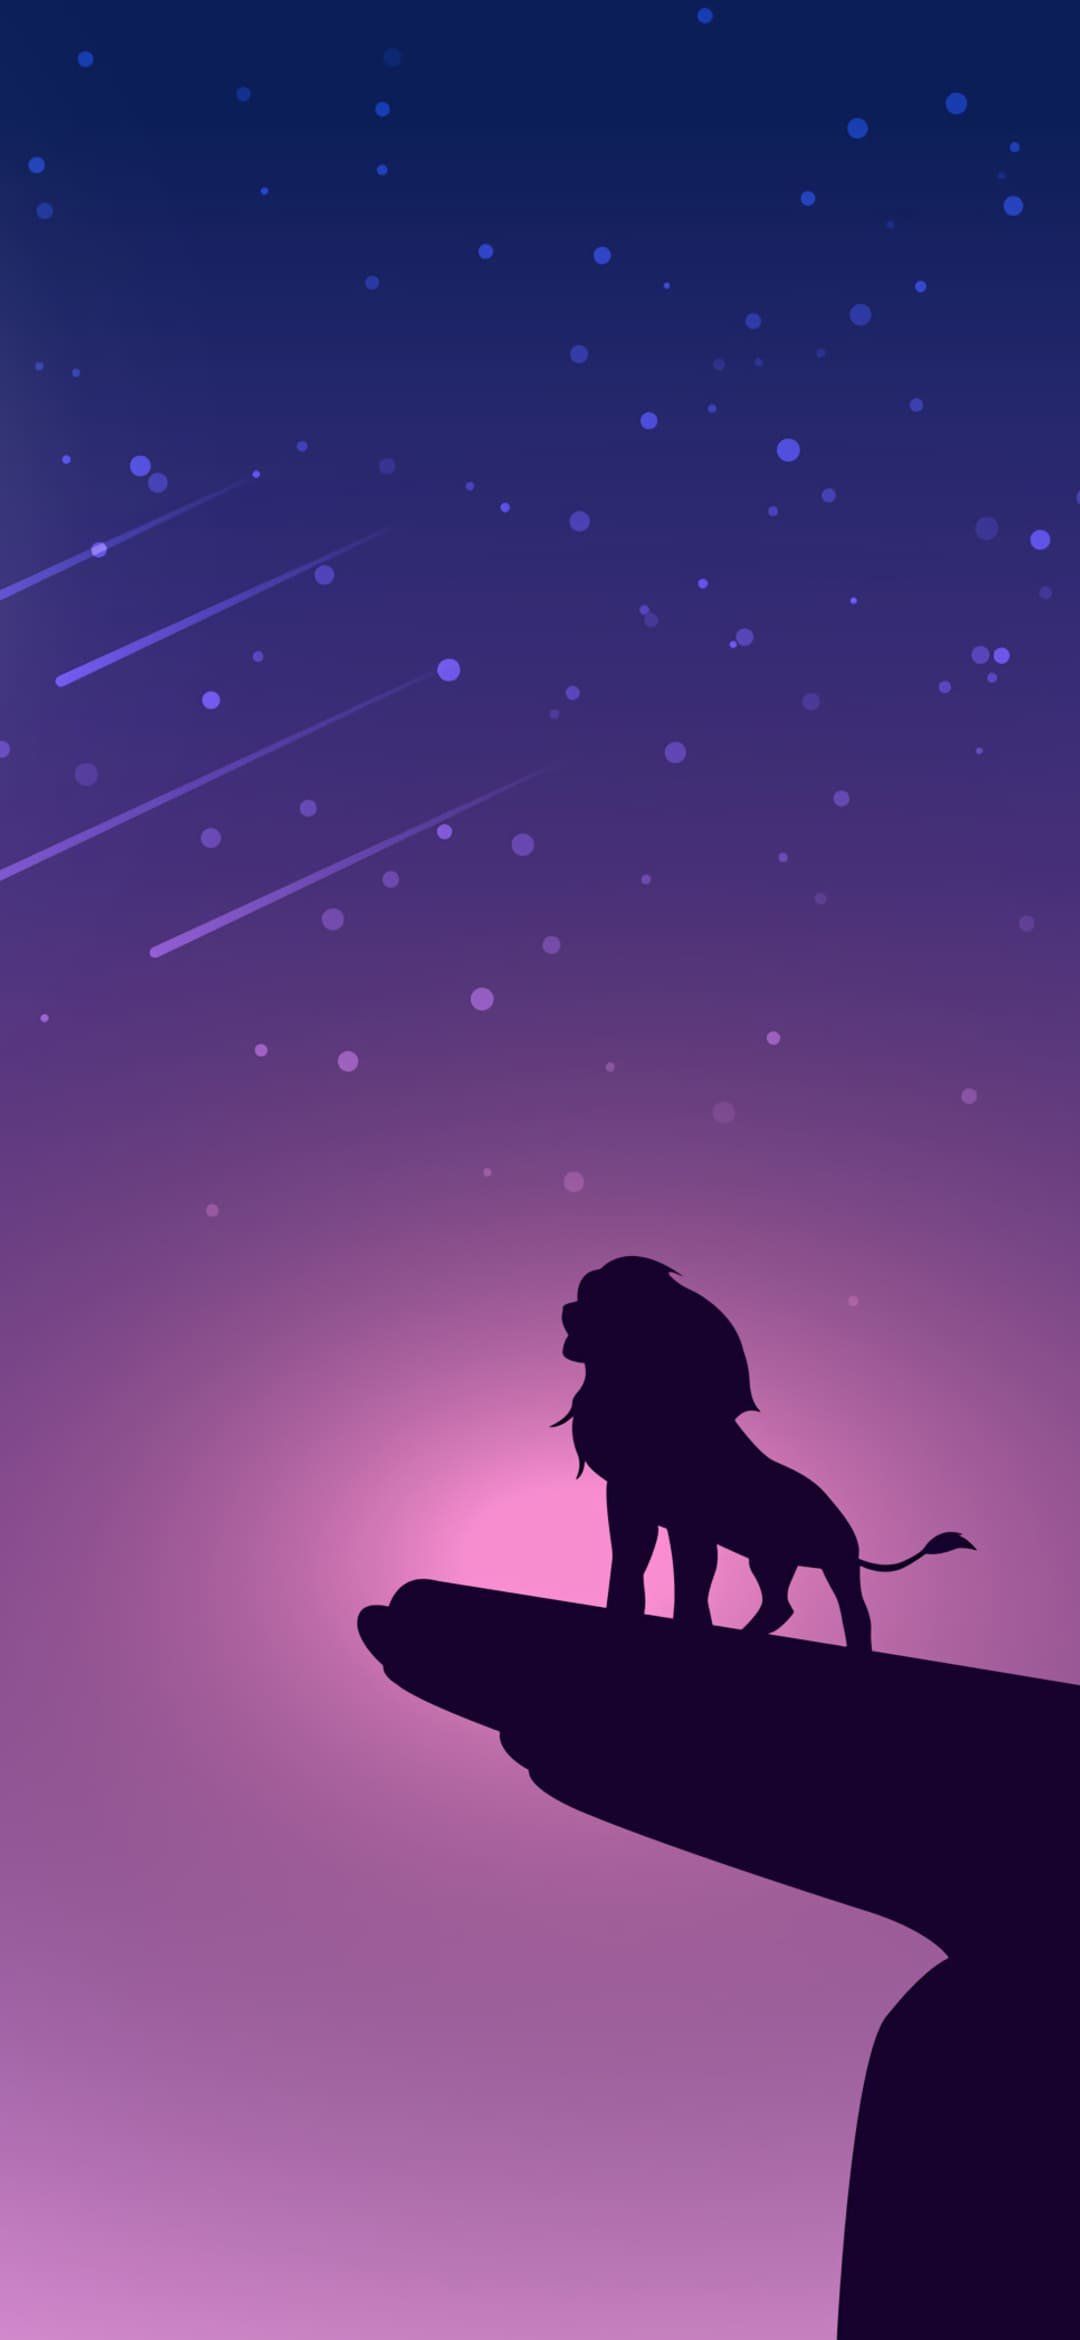 The lion king silhouette minimal Wallpaper Download